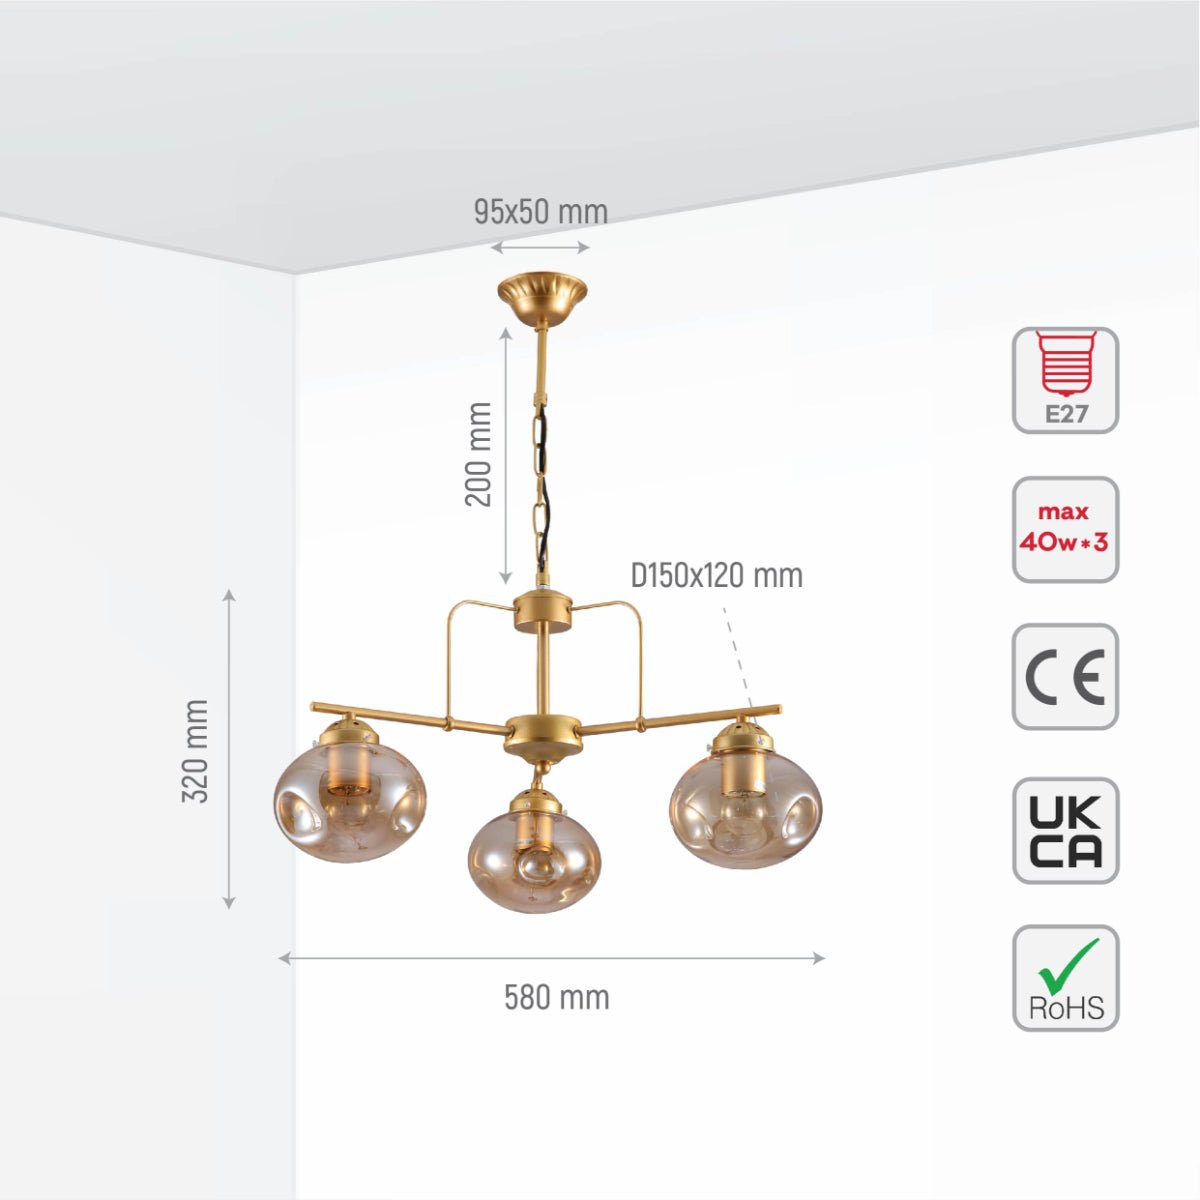 Size and specs of Gold Metal Rod Arm Amber Globe Glass Ceiling Light with E27 Fittings | TEKLED 159-17644